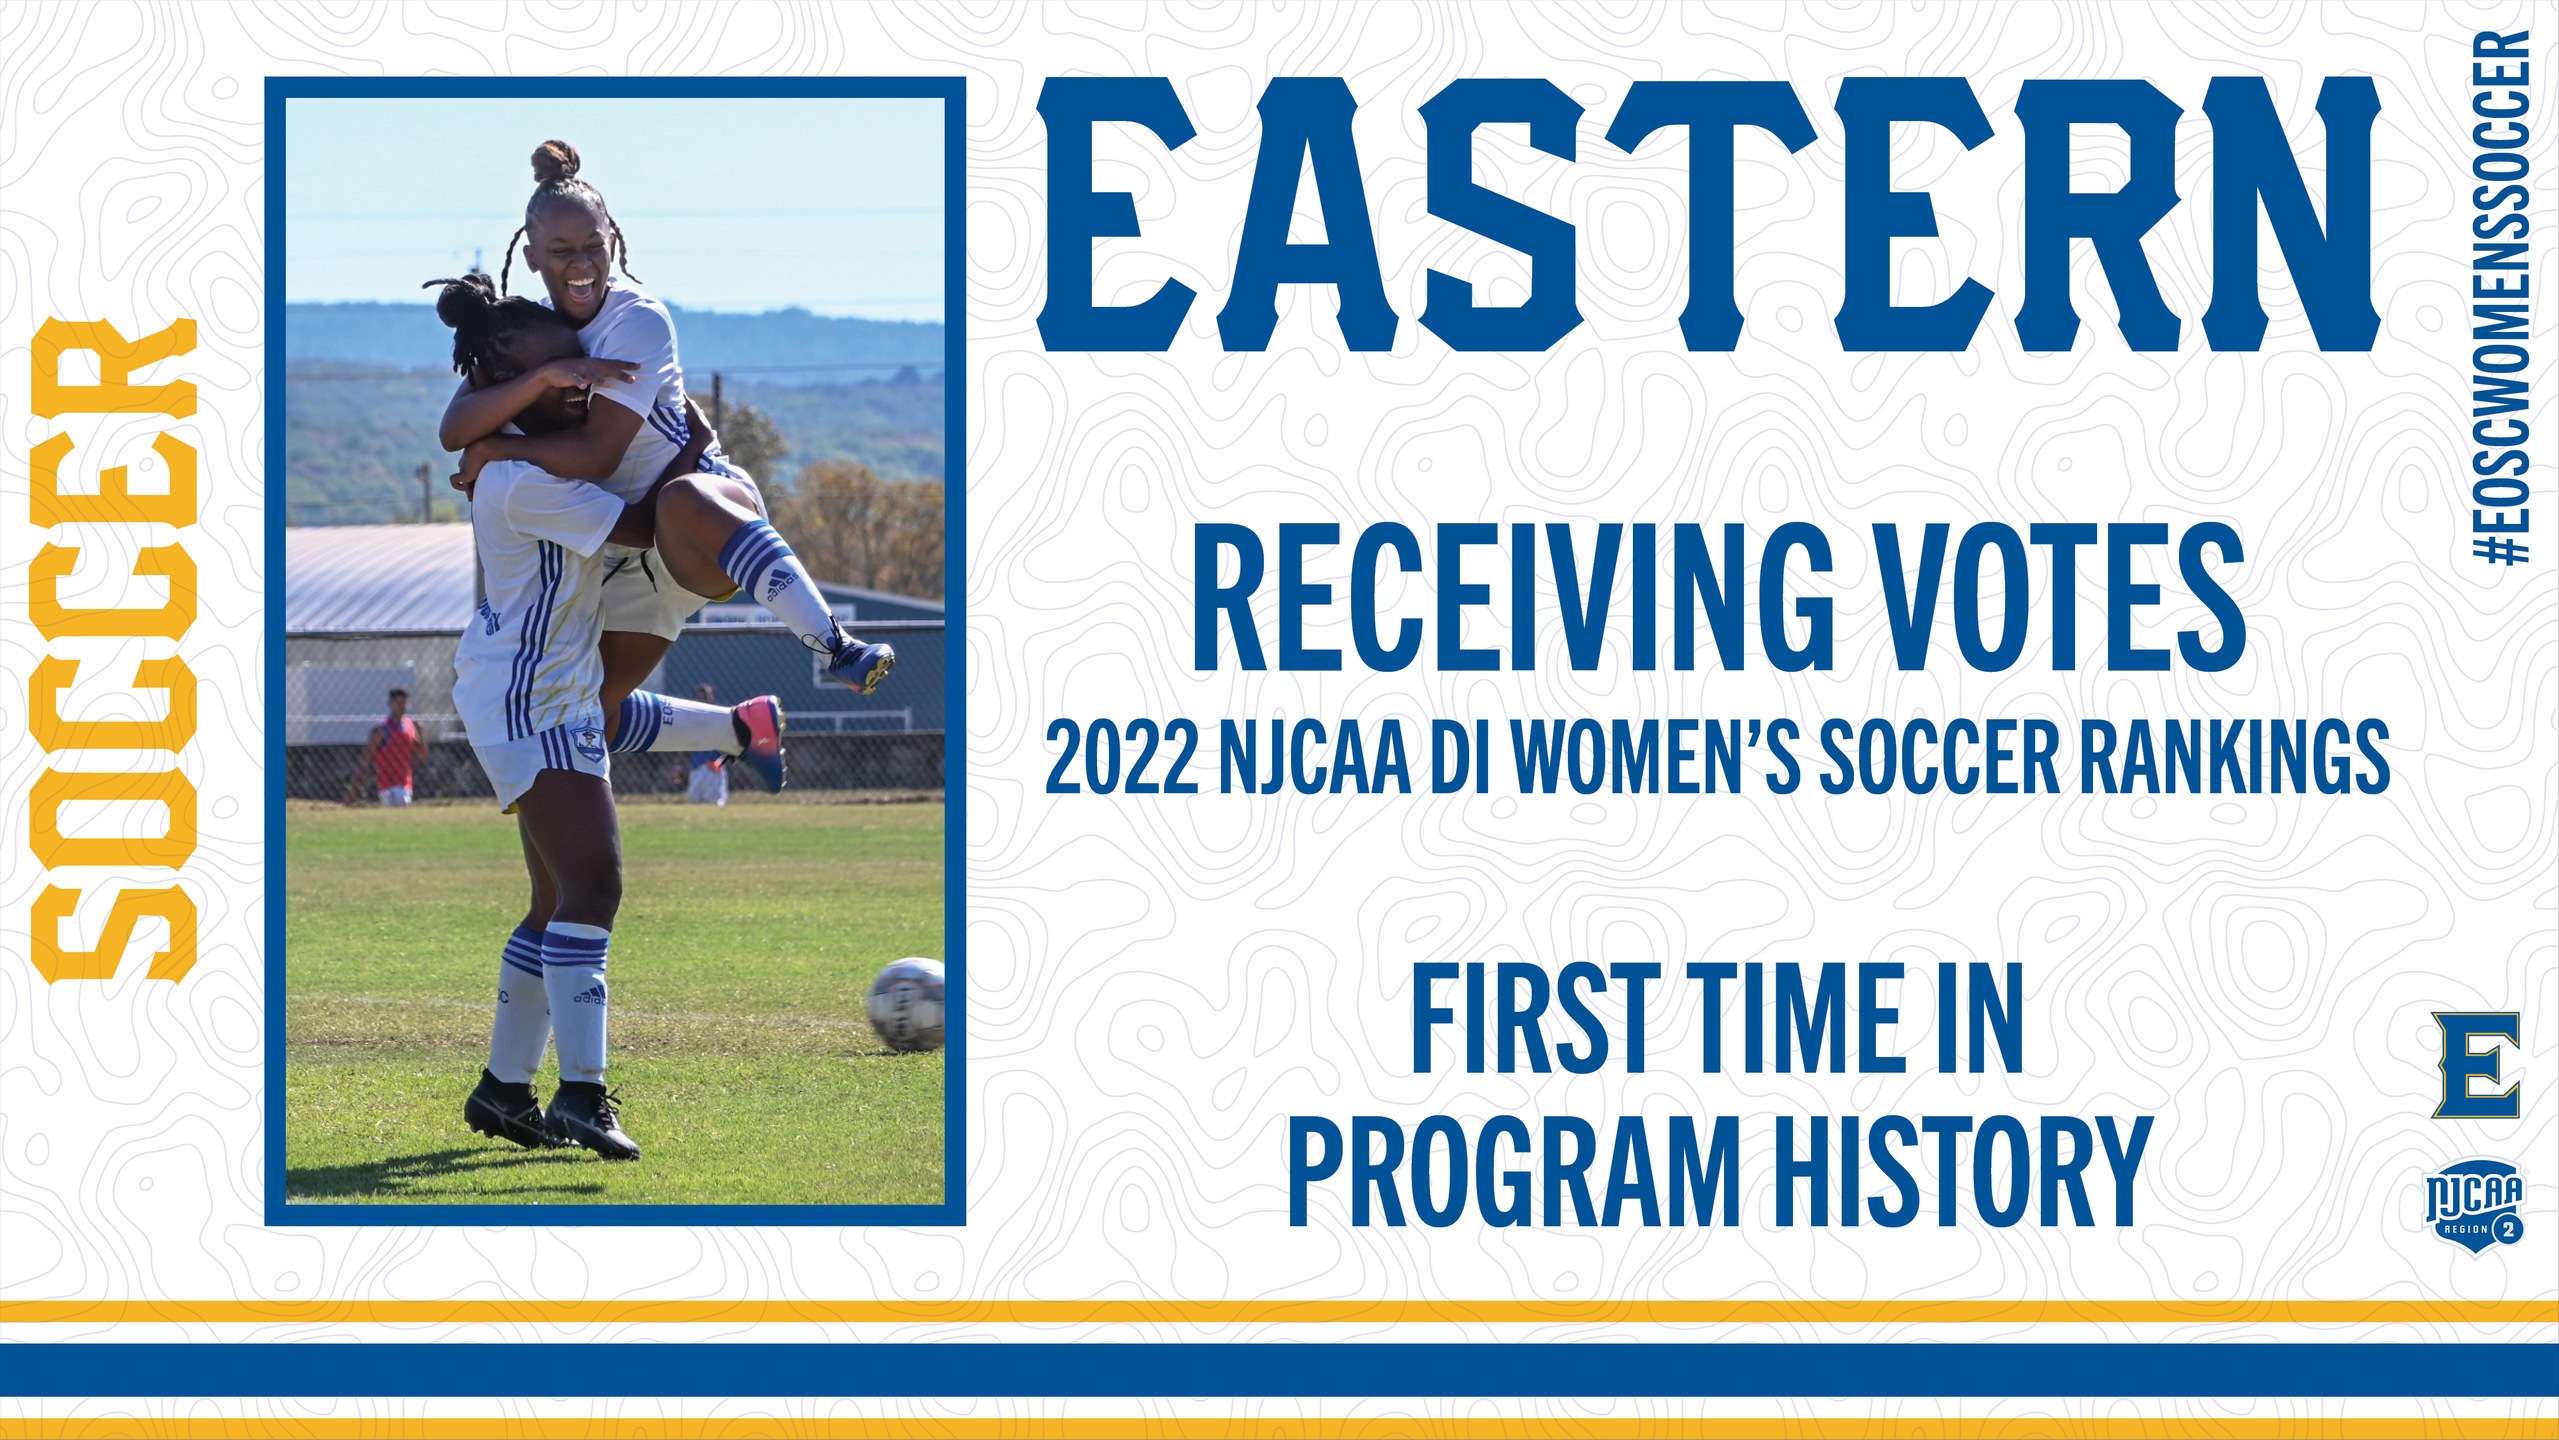 Women’s Soccer Receiving Votes for First Time in Program History